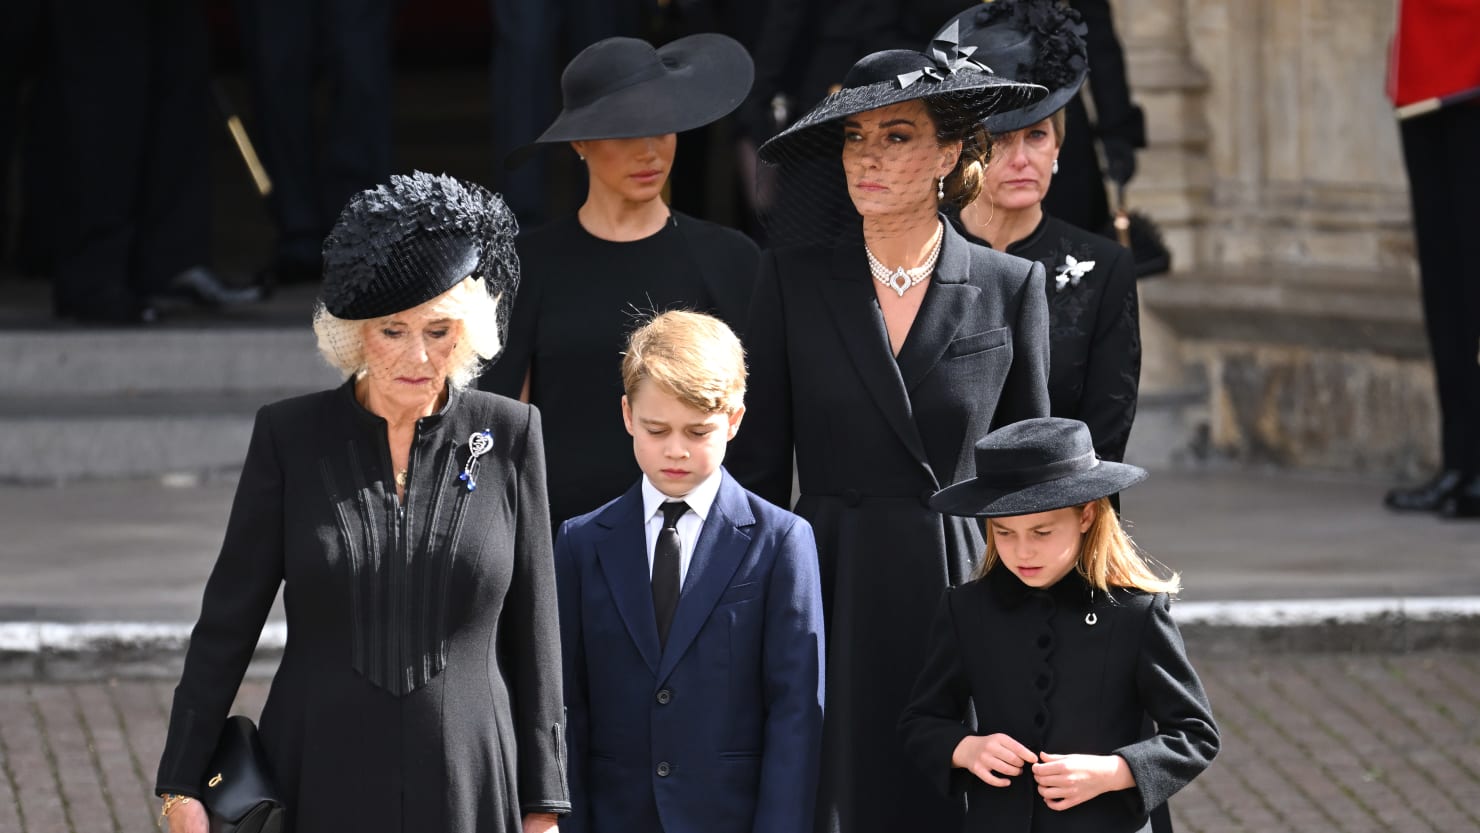 Meghan and Kate Totally Ignored Each Other for All 10 Days of the Queen's Funeral Rituals - The Daily Beast